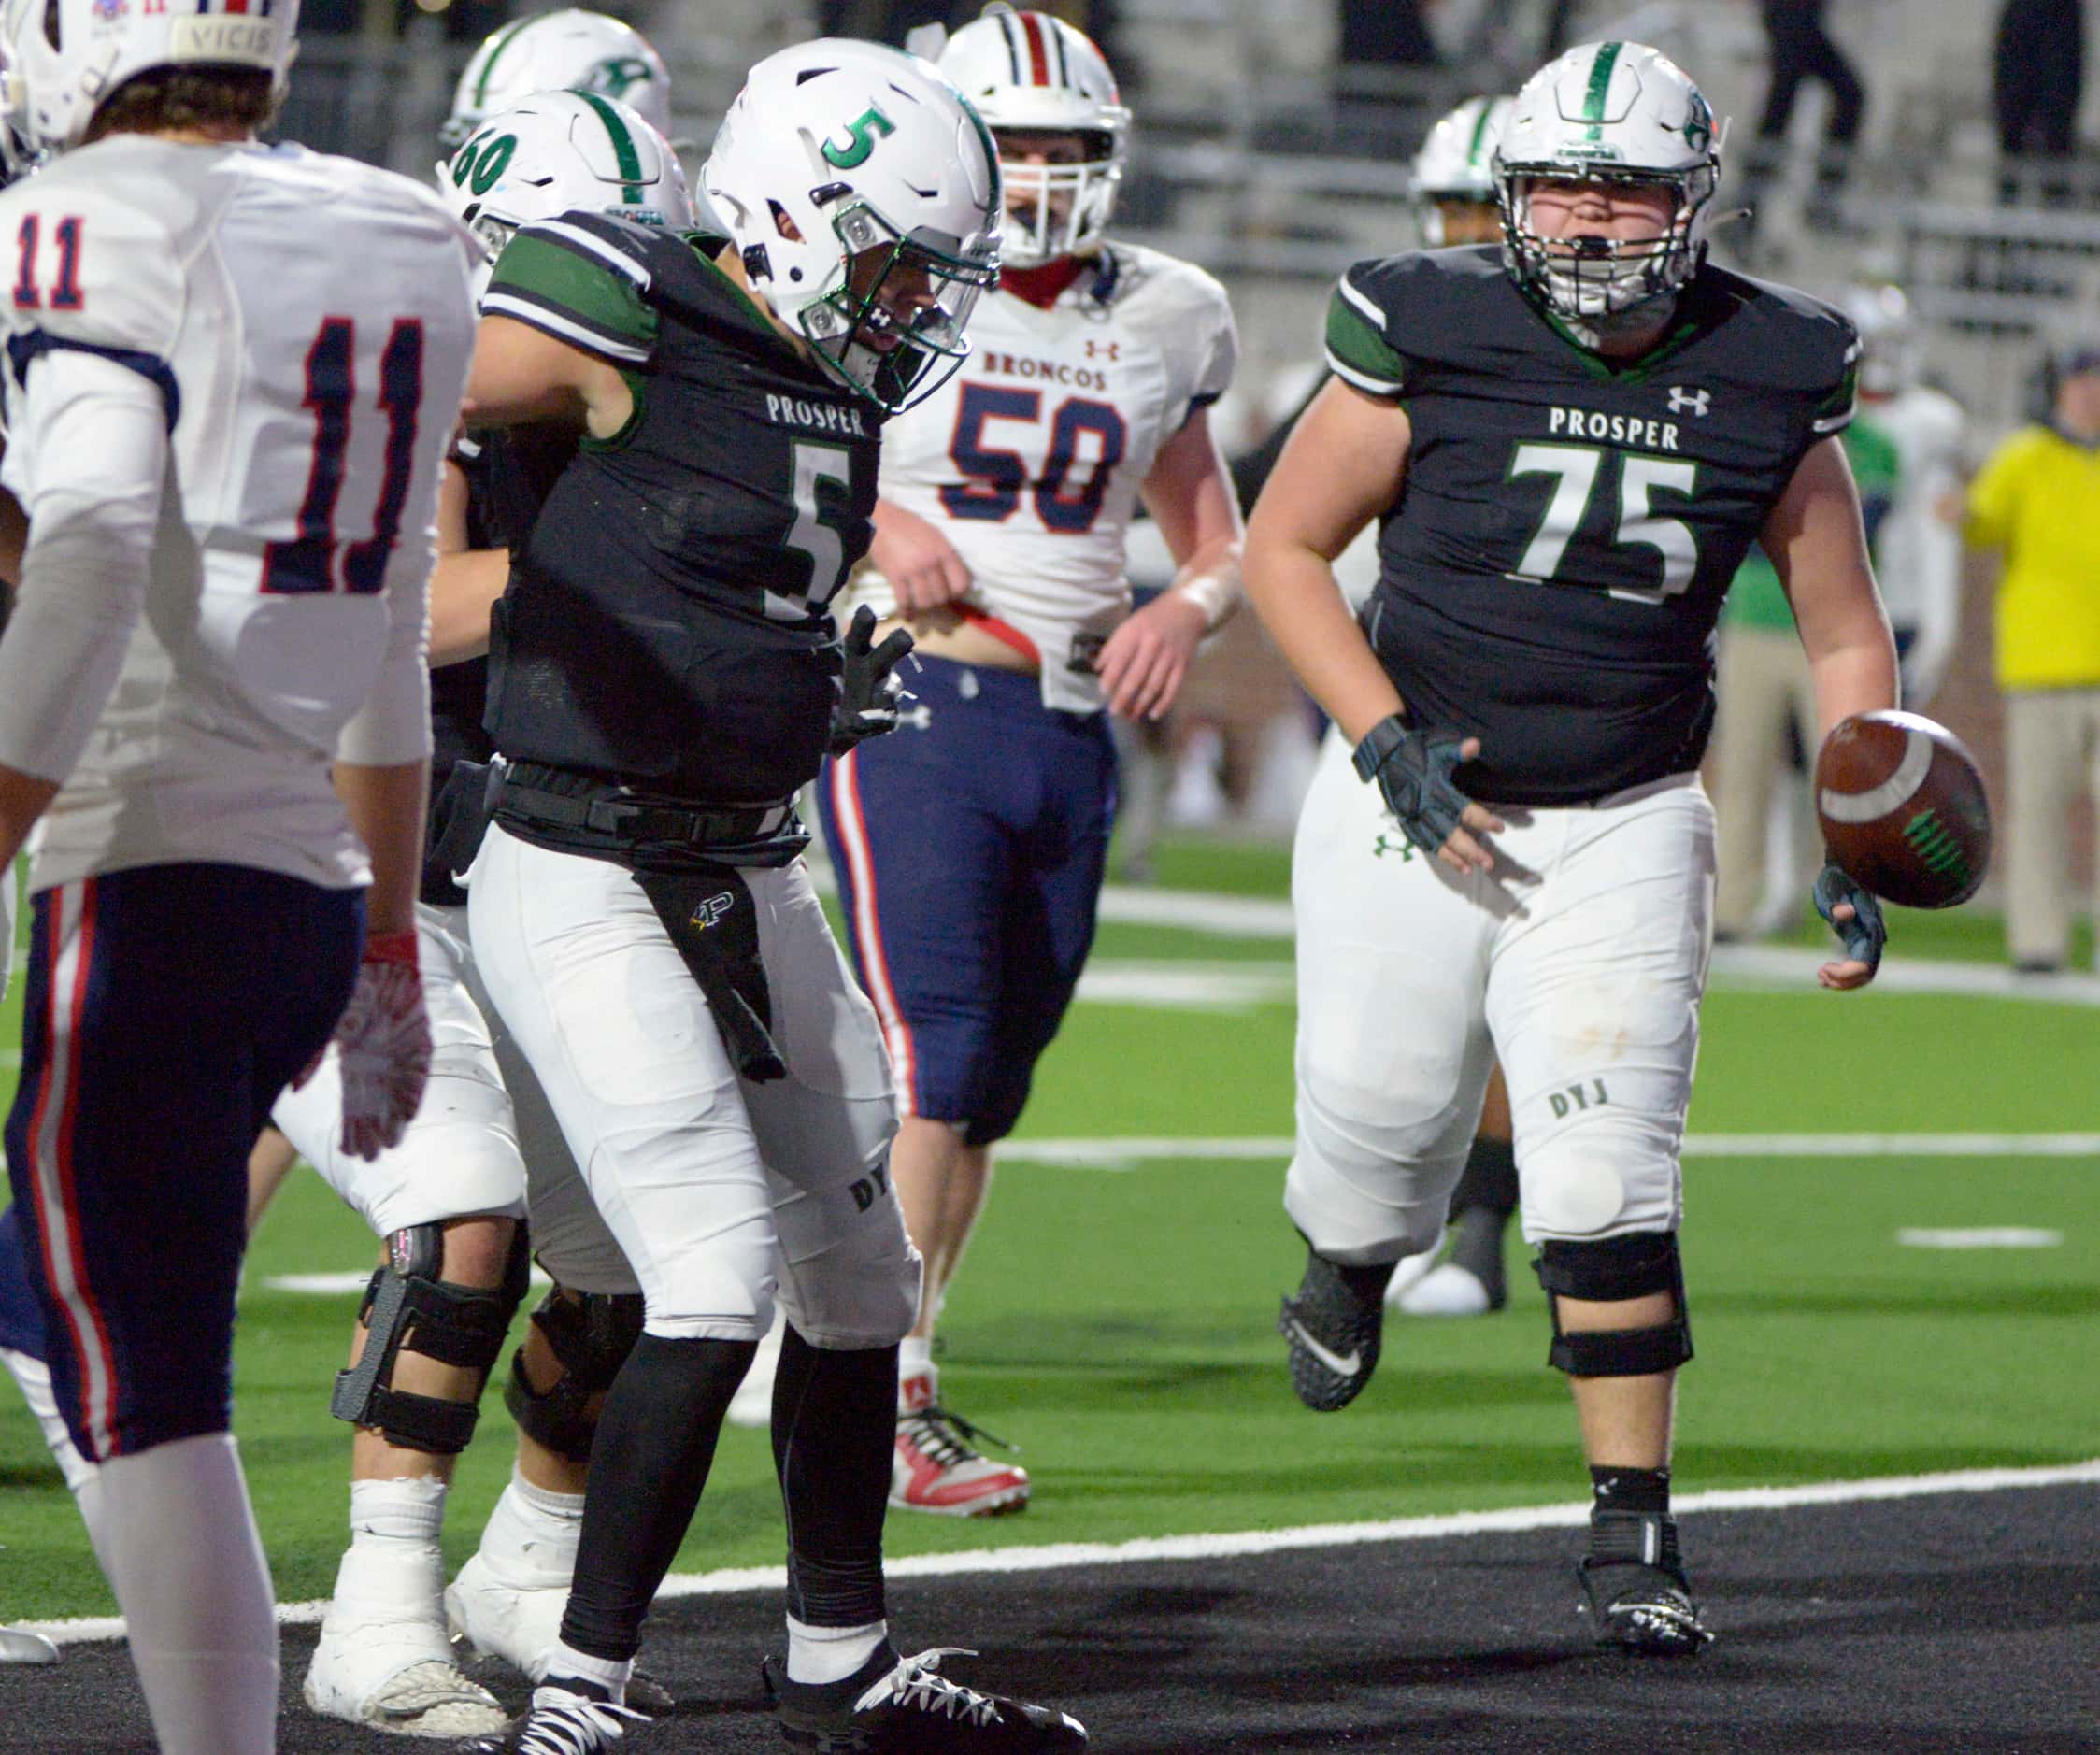 Prosper’s Jackson Berry (5) spikes the ball after his game-winning touchdown in the final...